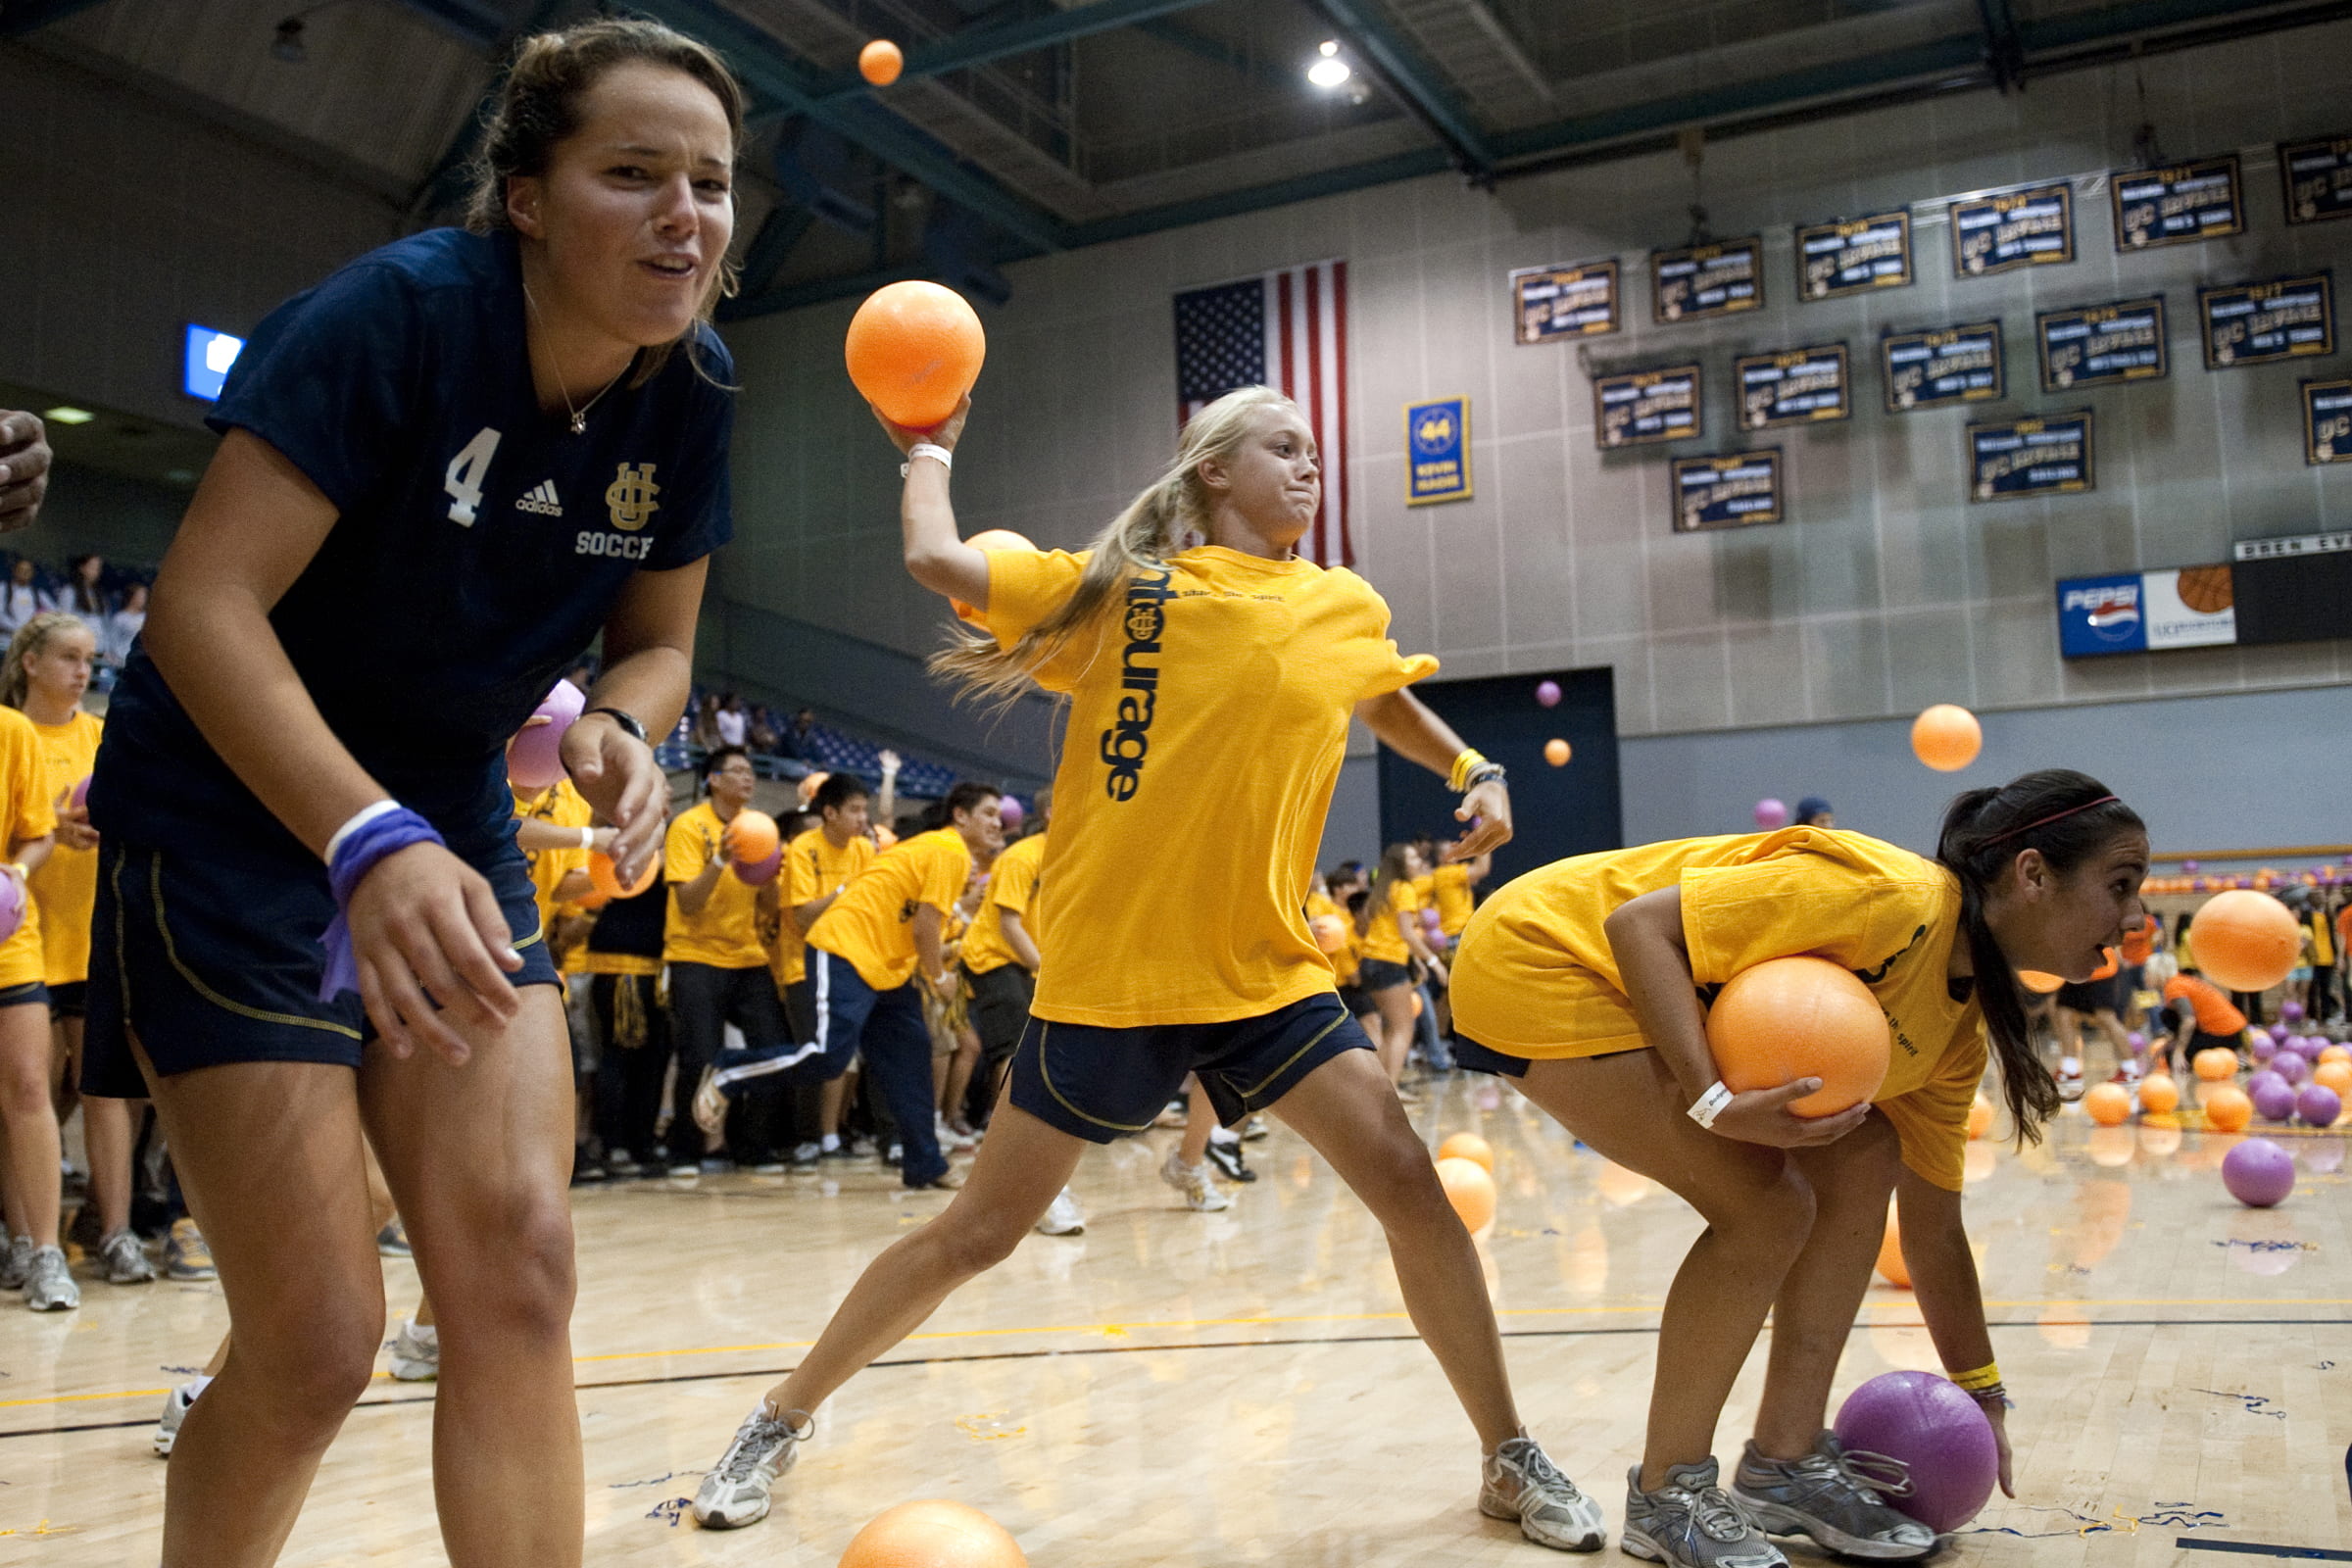 Students in last year’s successful quest for the world-record dodgeball game